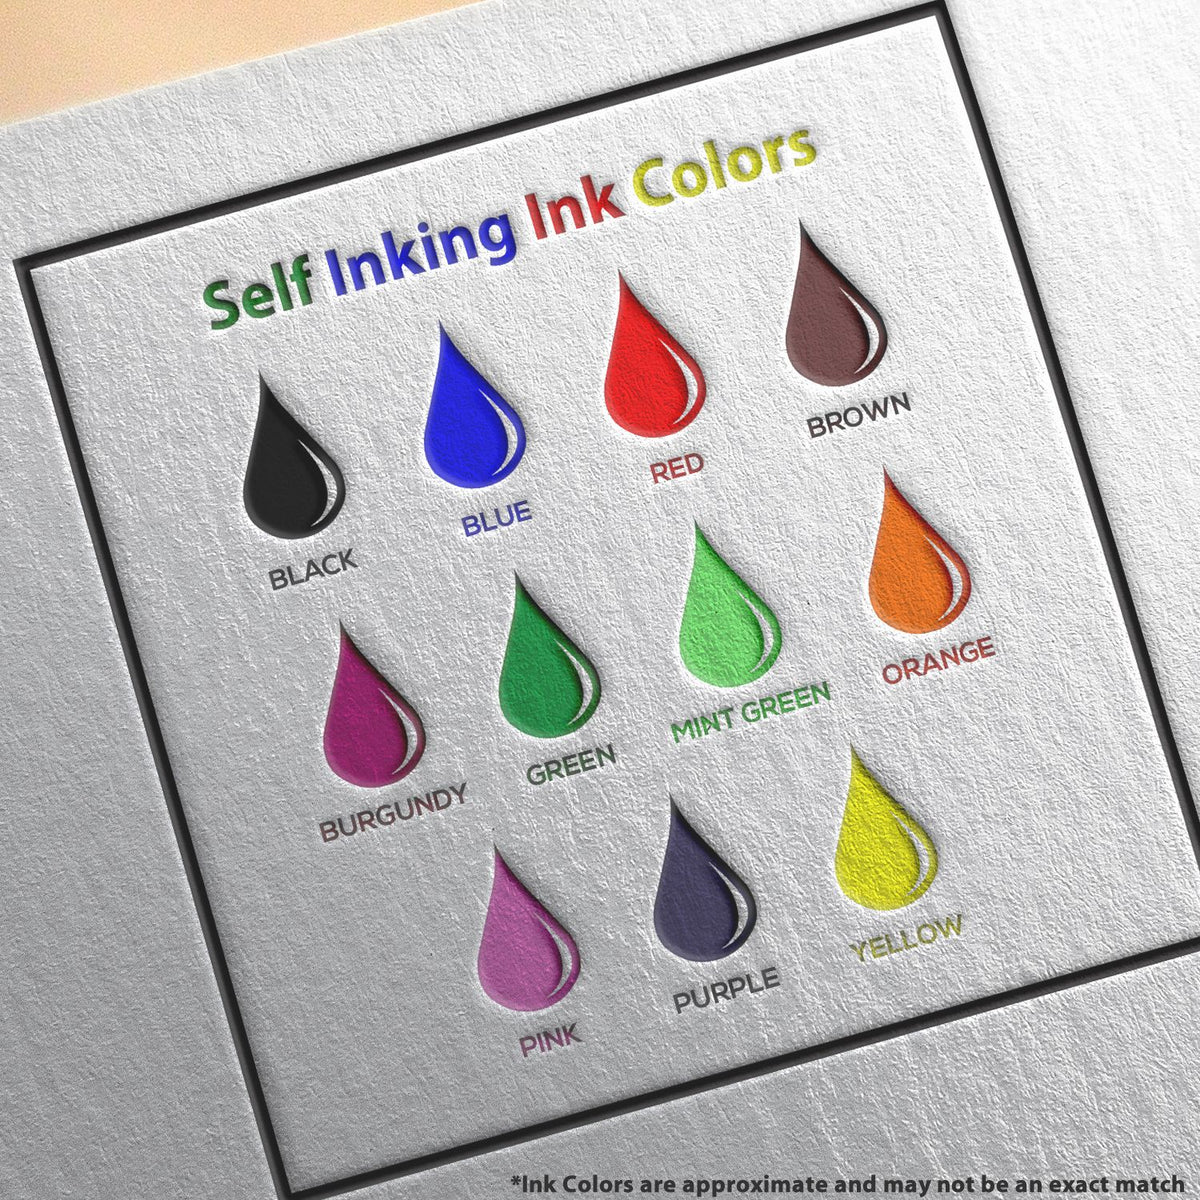 A picture showing the different ink colors or hues available for the Self-Inking Arizona Landscape Architect Stamp product.